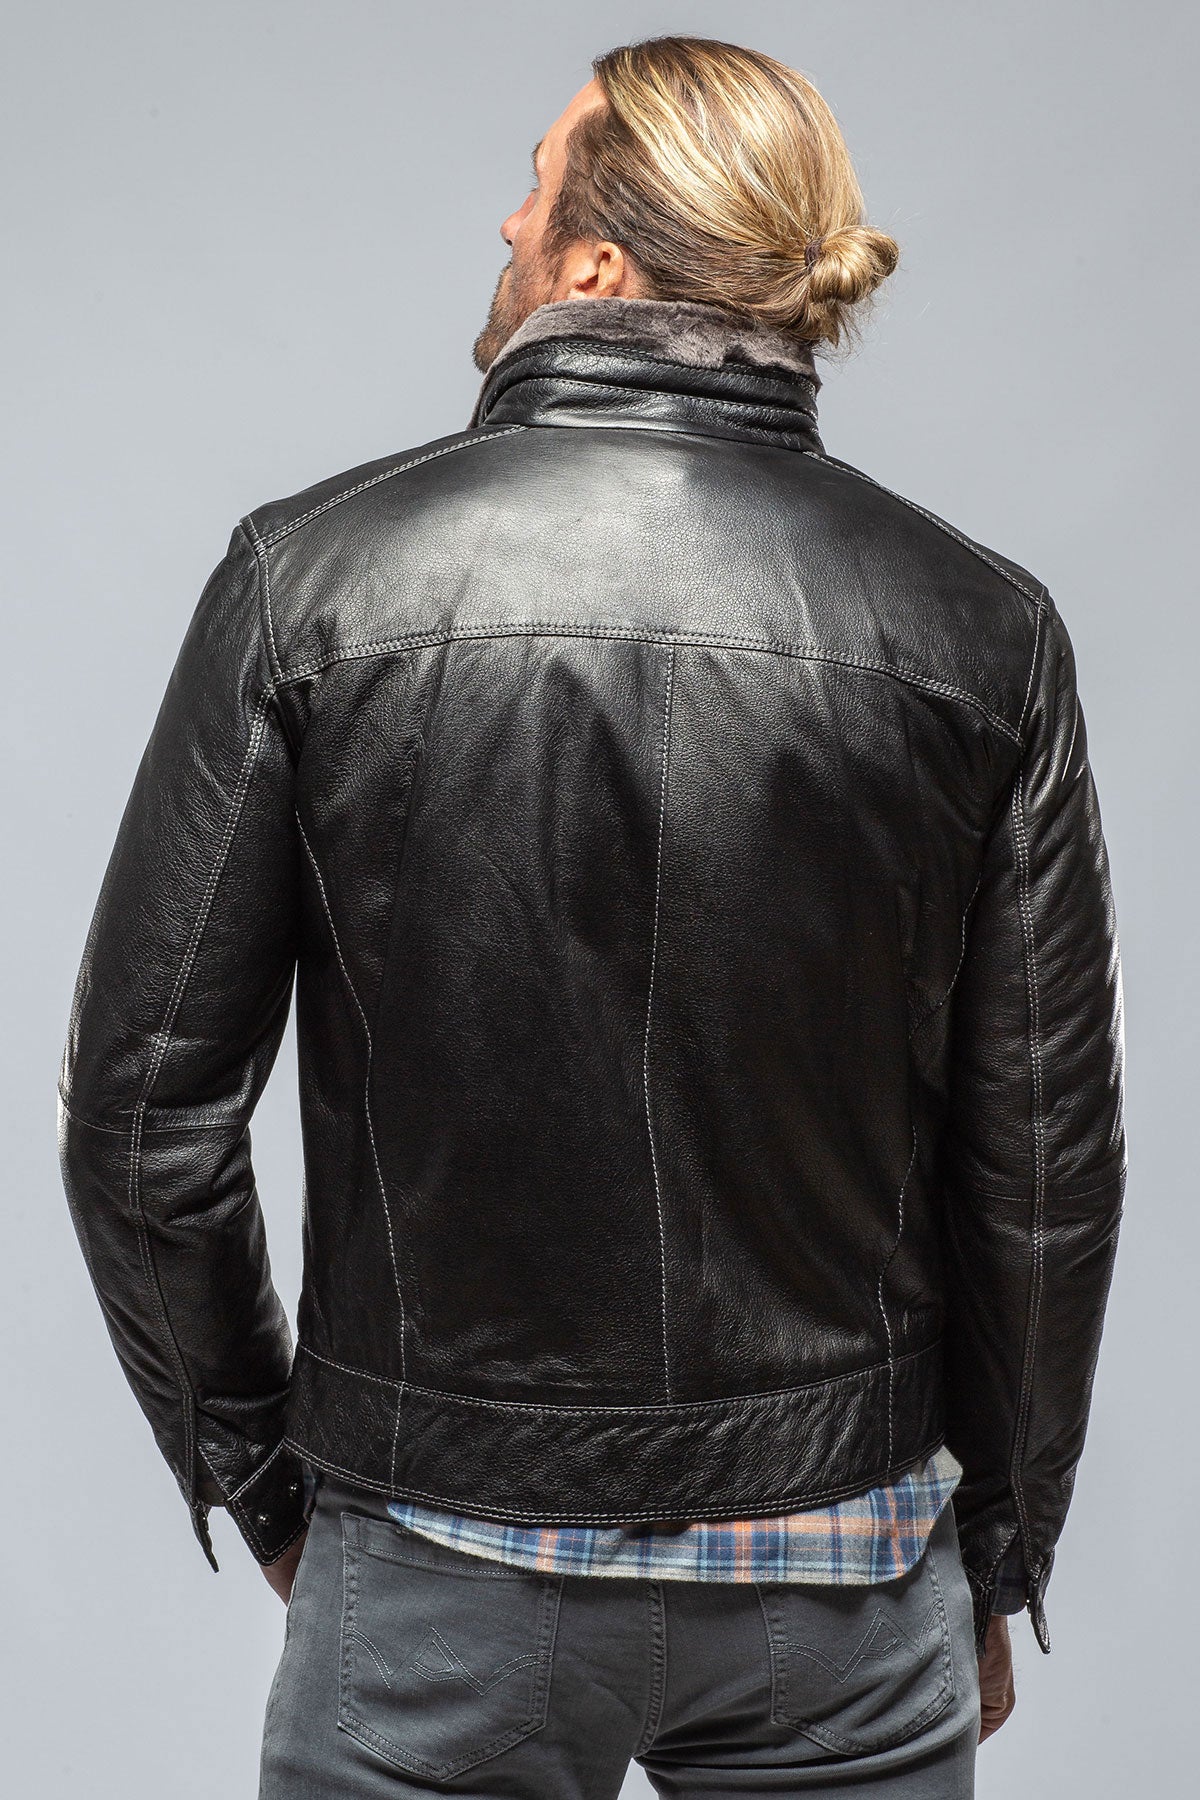 Jonathan Moto | Samples - Mens - Outerwear - Leather | Gimo's